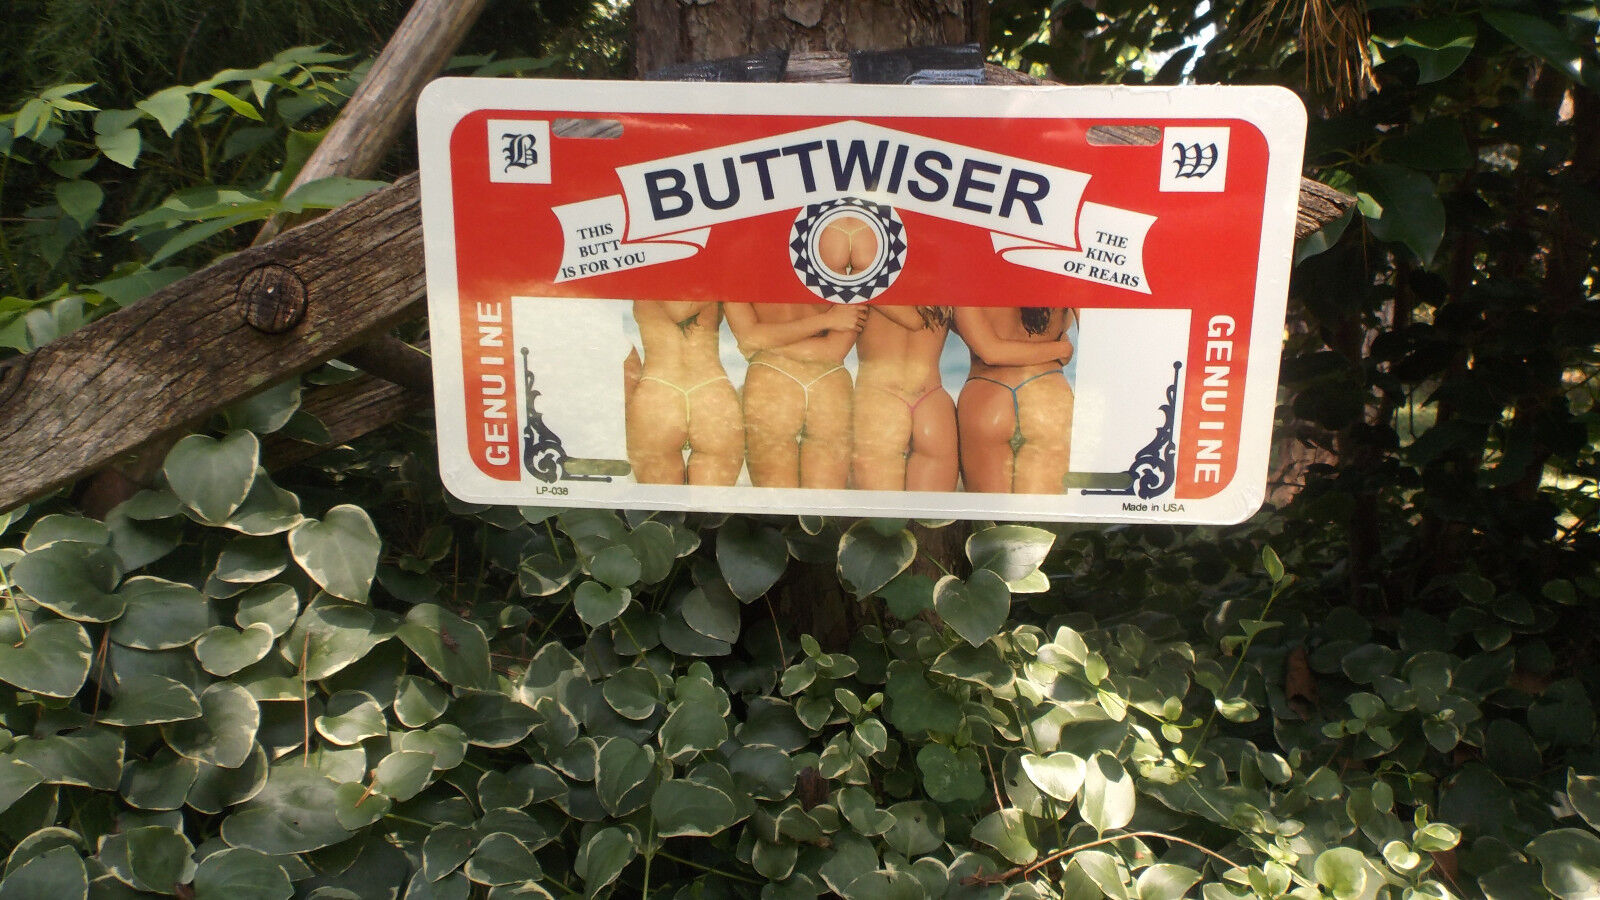 BUTTWISER GIRLS IN THONGS ADVERTISING LICENSE TAG PLATE SIGN MAN CAVE SIGNS NEW